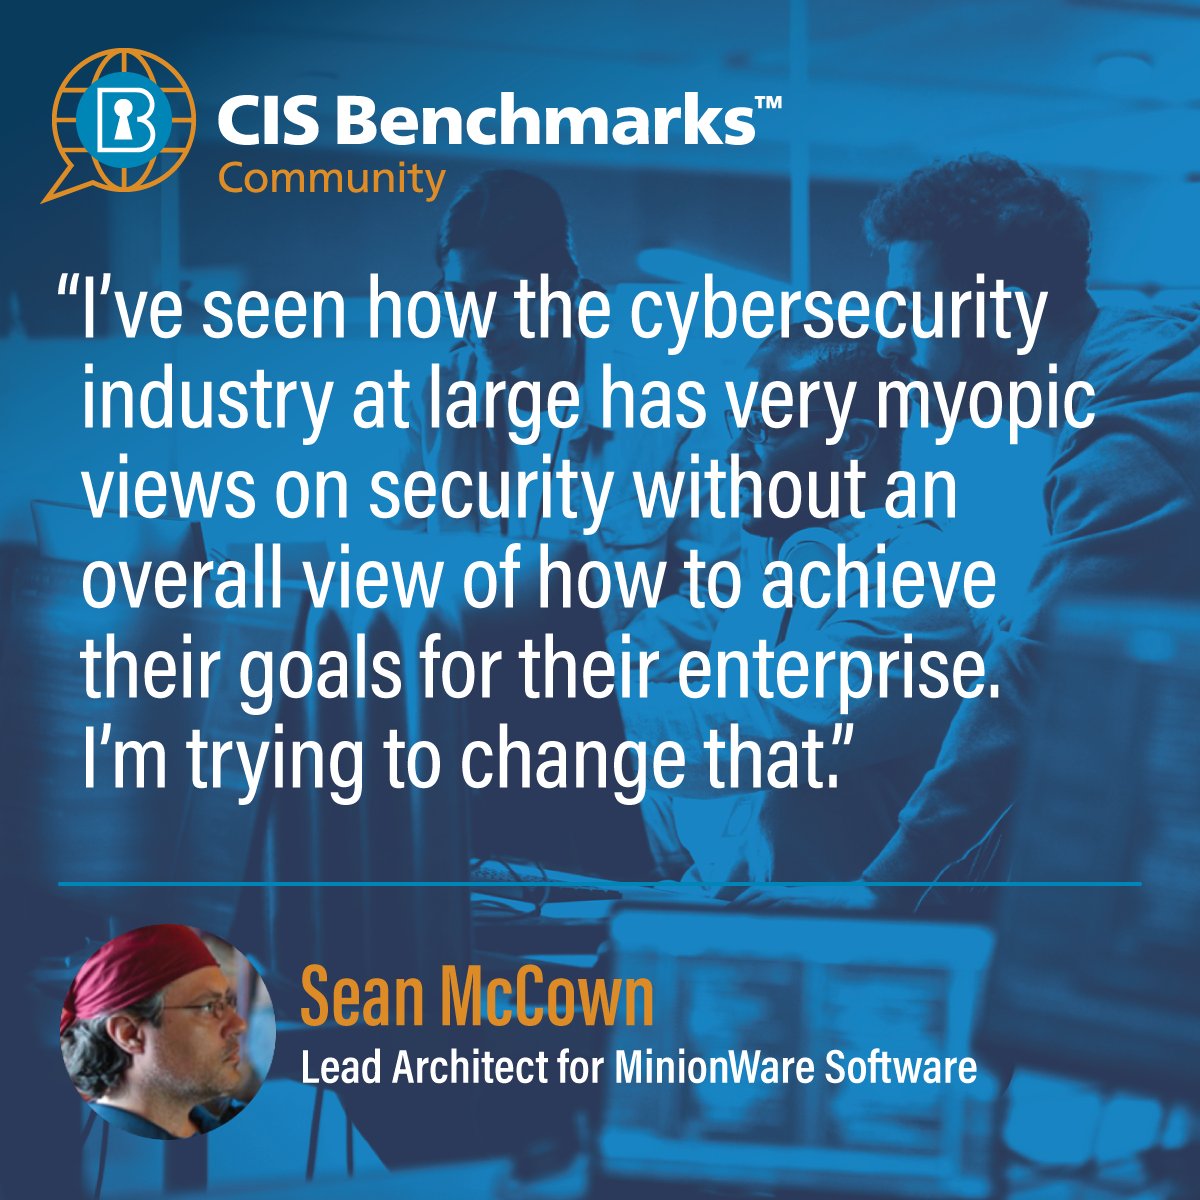 Interested in becoming a volunteer like Sean McCown? Join a CIS Community today. bit.ly/42BDOBo #VolunteerSpotlight #cybersecurity